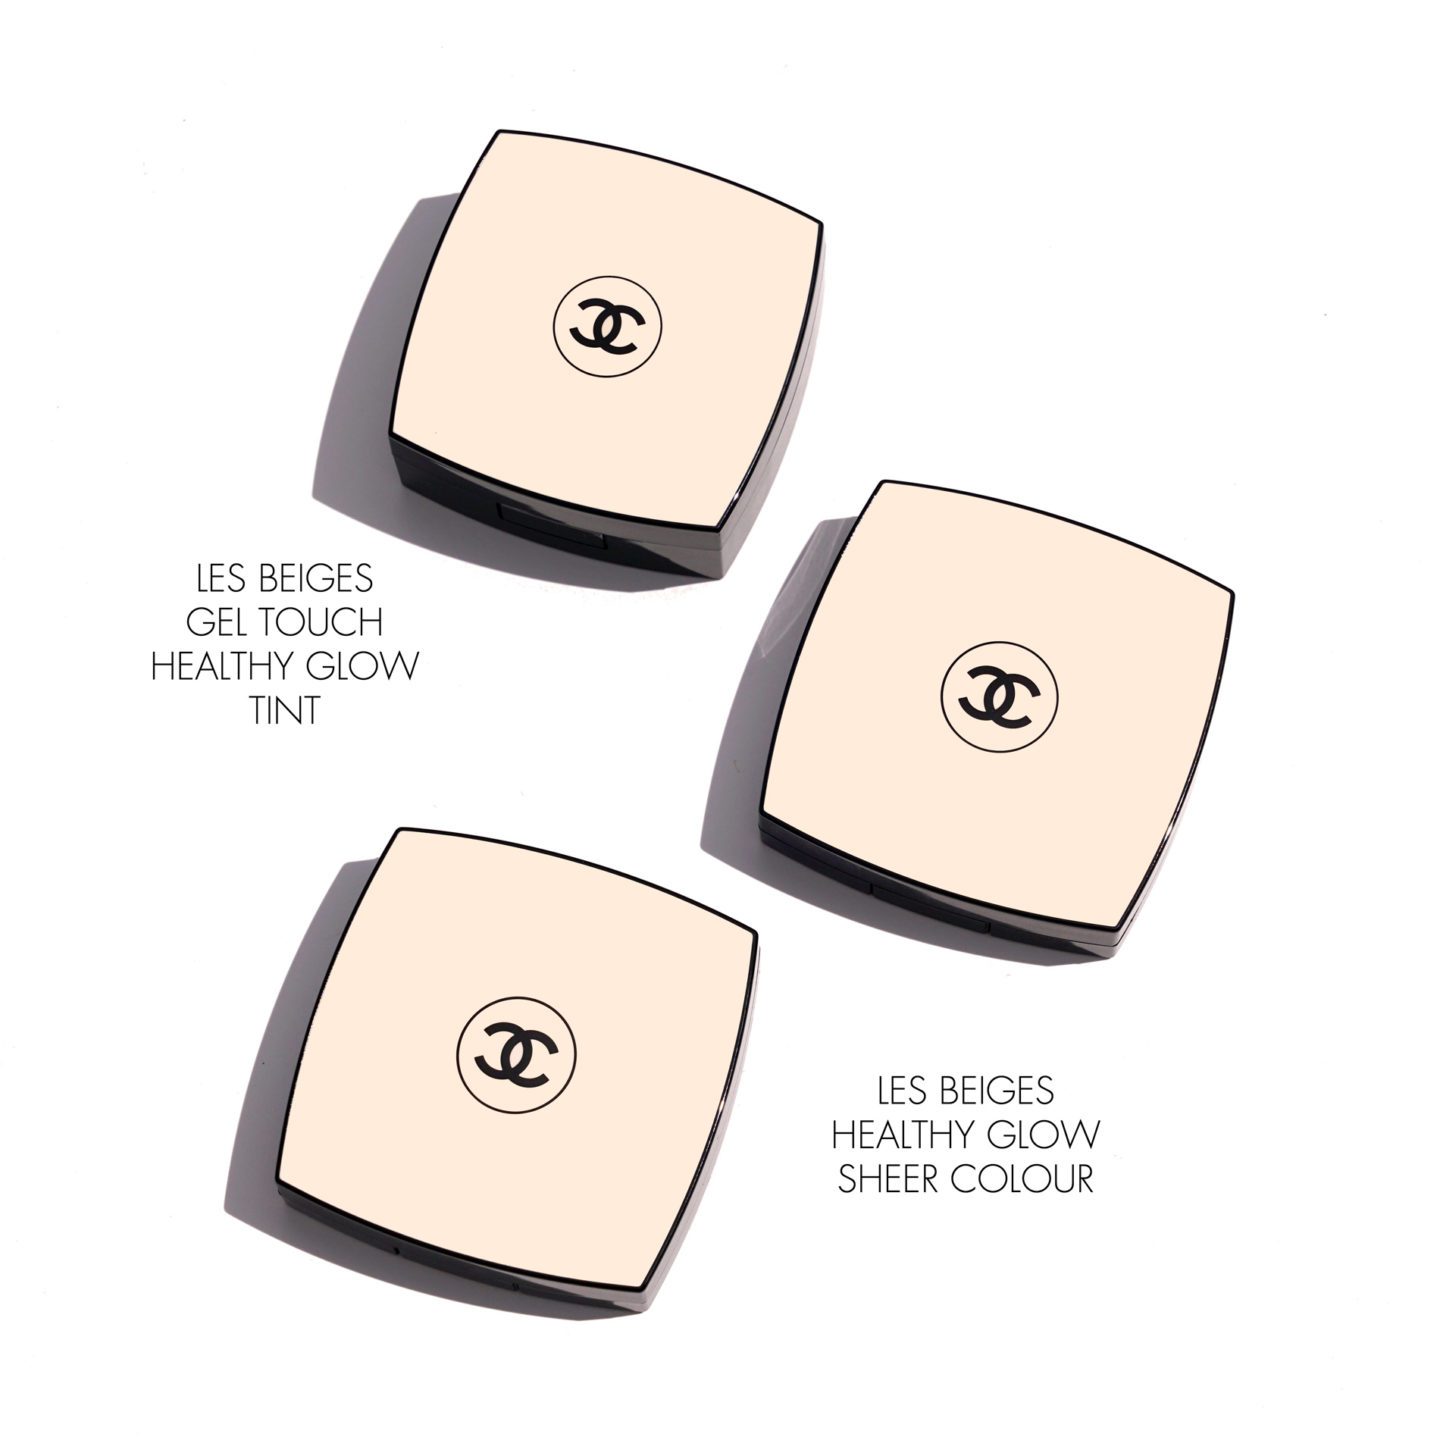 Chanel Les Beiges Gel Touch Healthy Glow Tint 30 and 40 | The Beauty Look Book